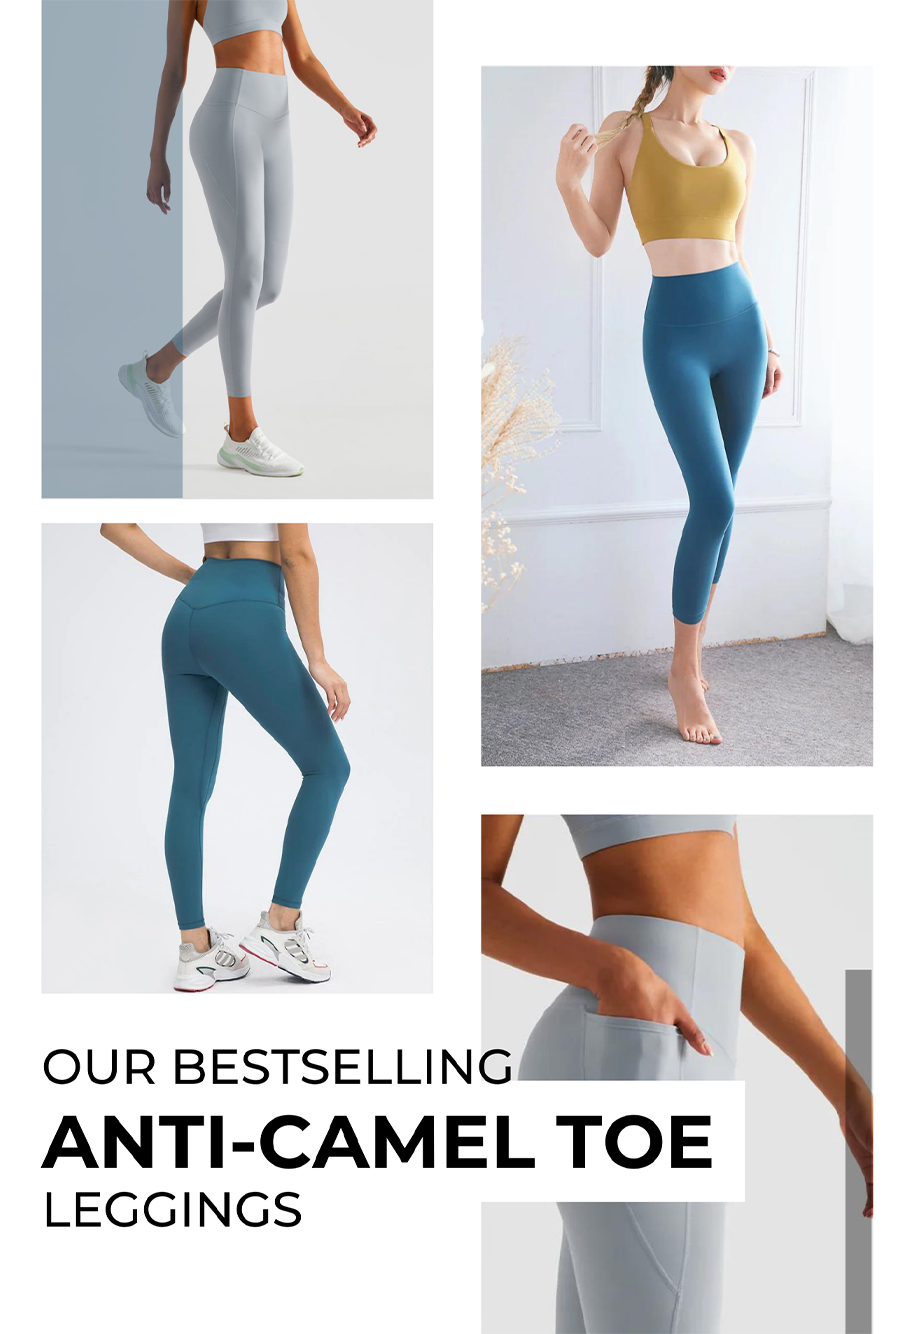 Leggings that Pass the Test 🏆: No More Camel Toe Worries - Gym